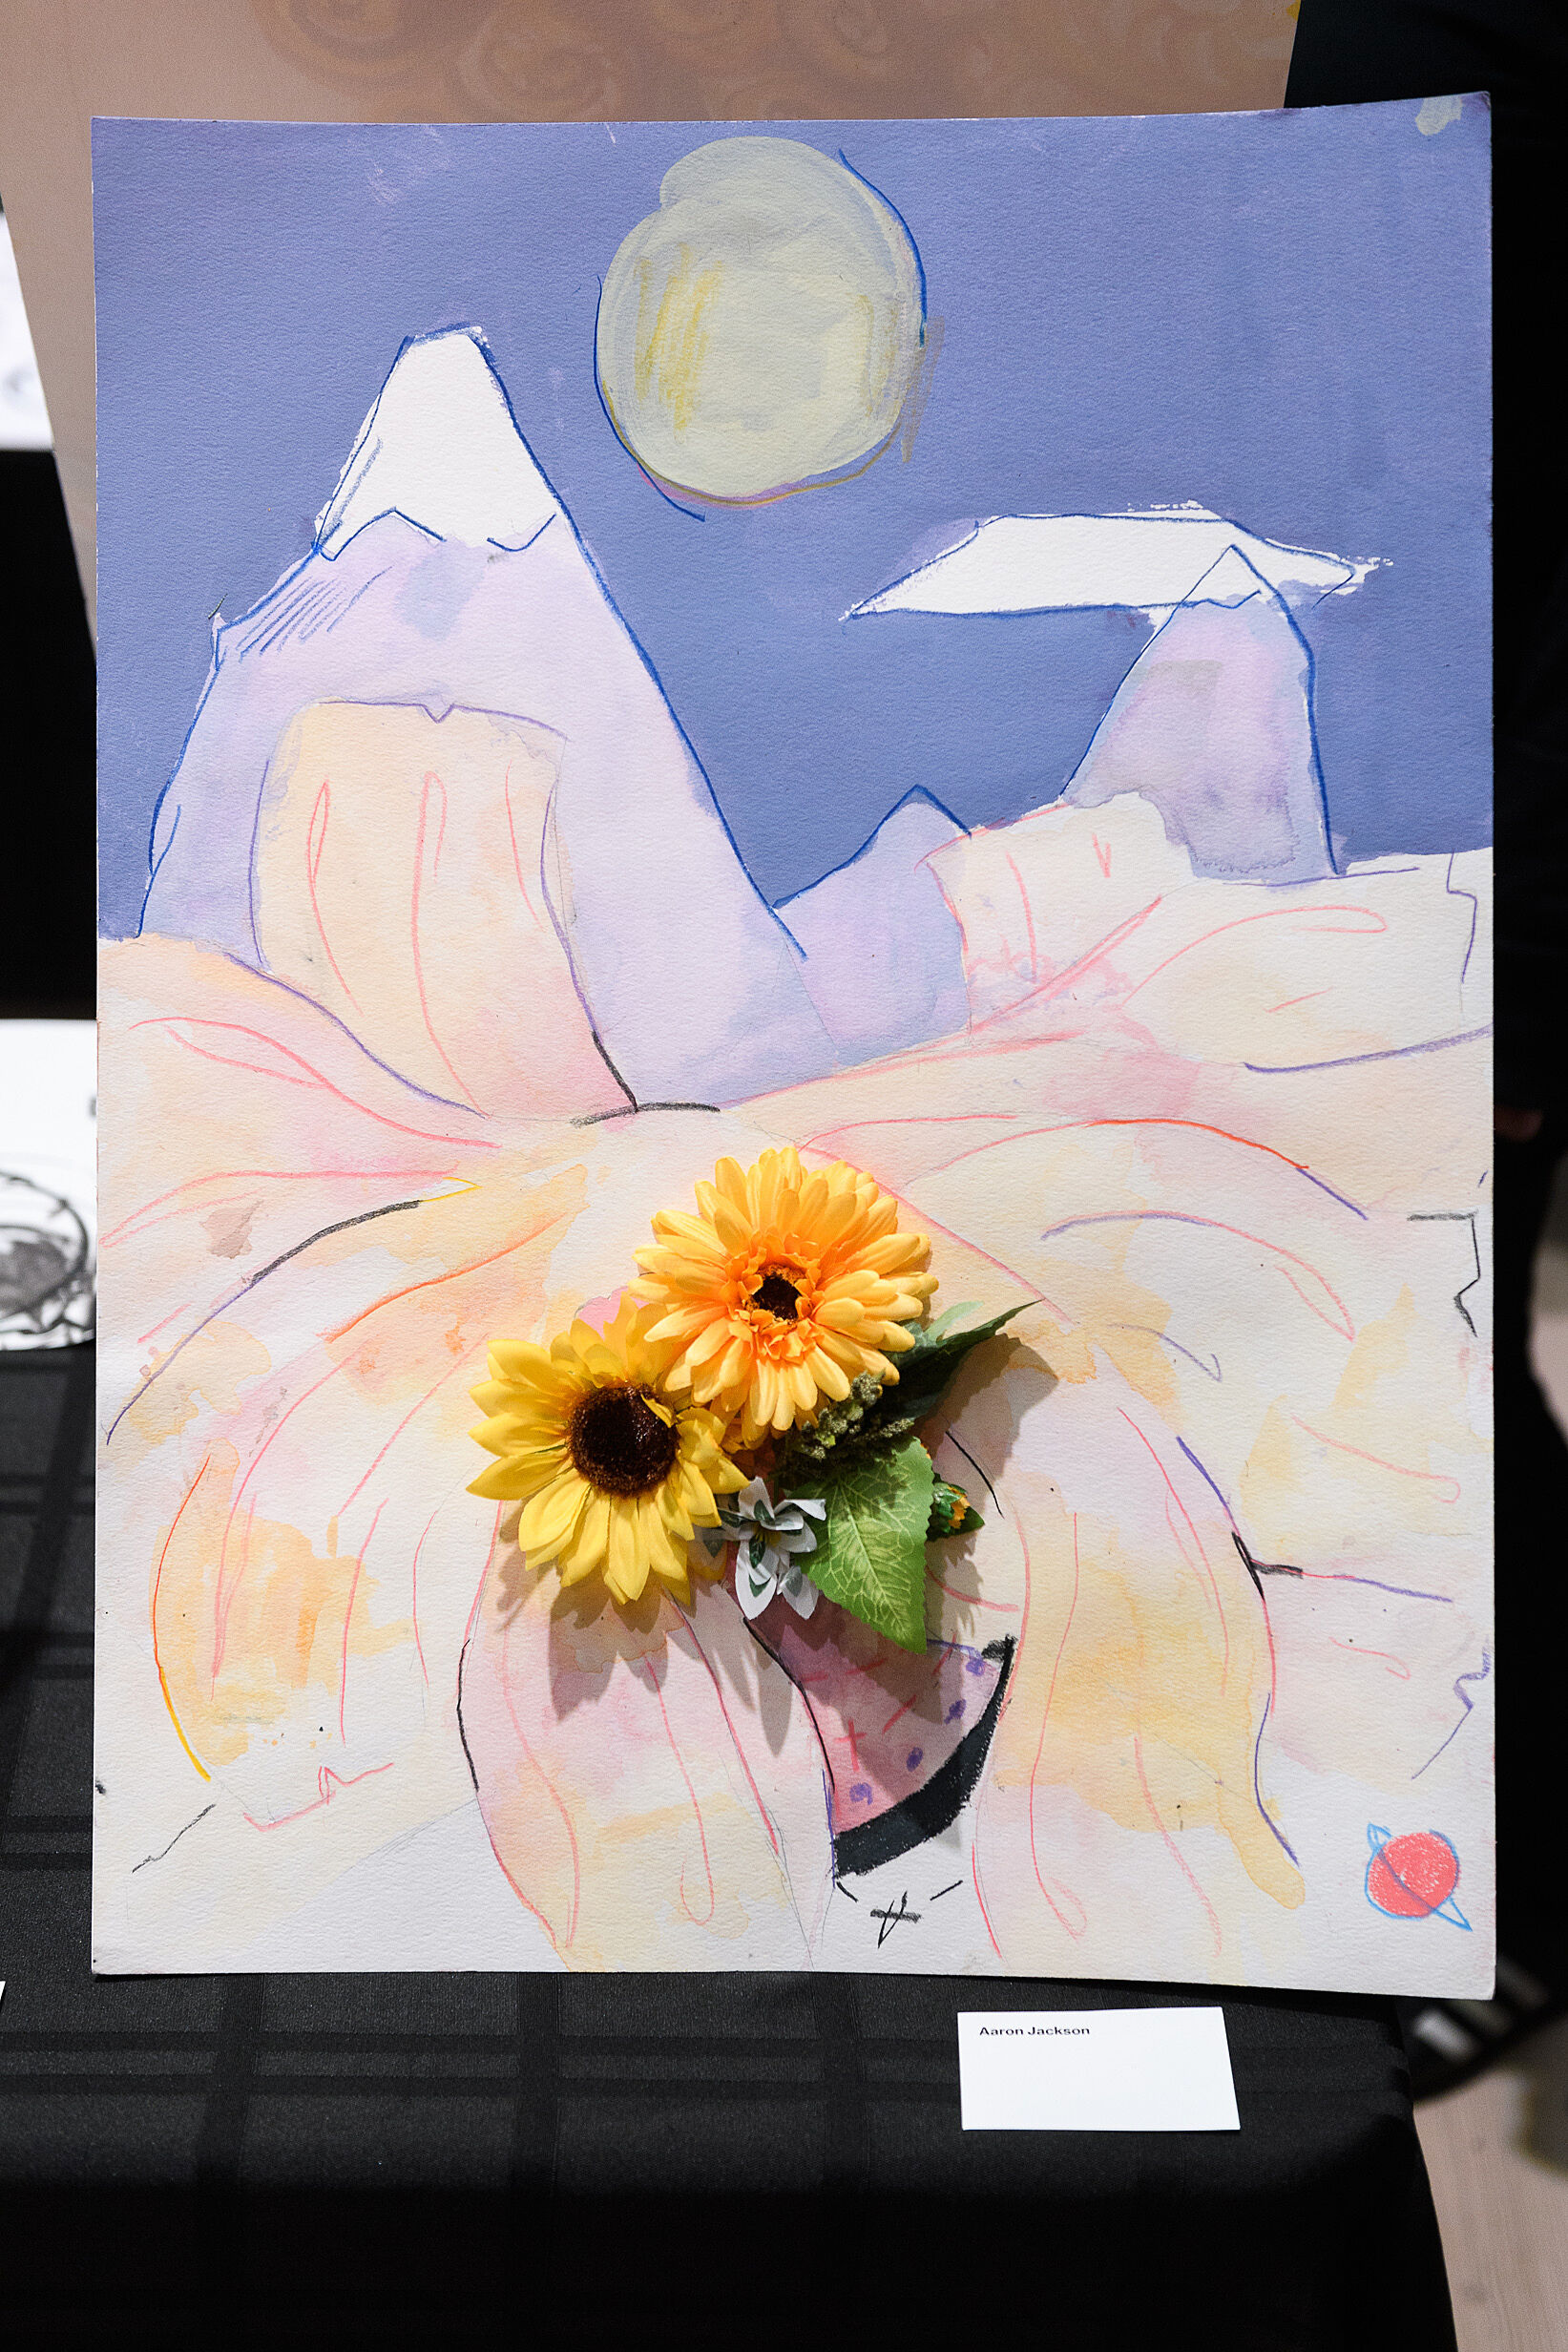 Mixed media of flowers and a landscape.